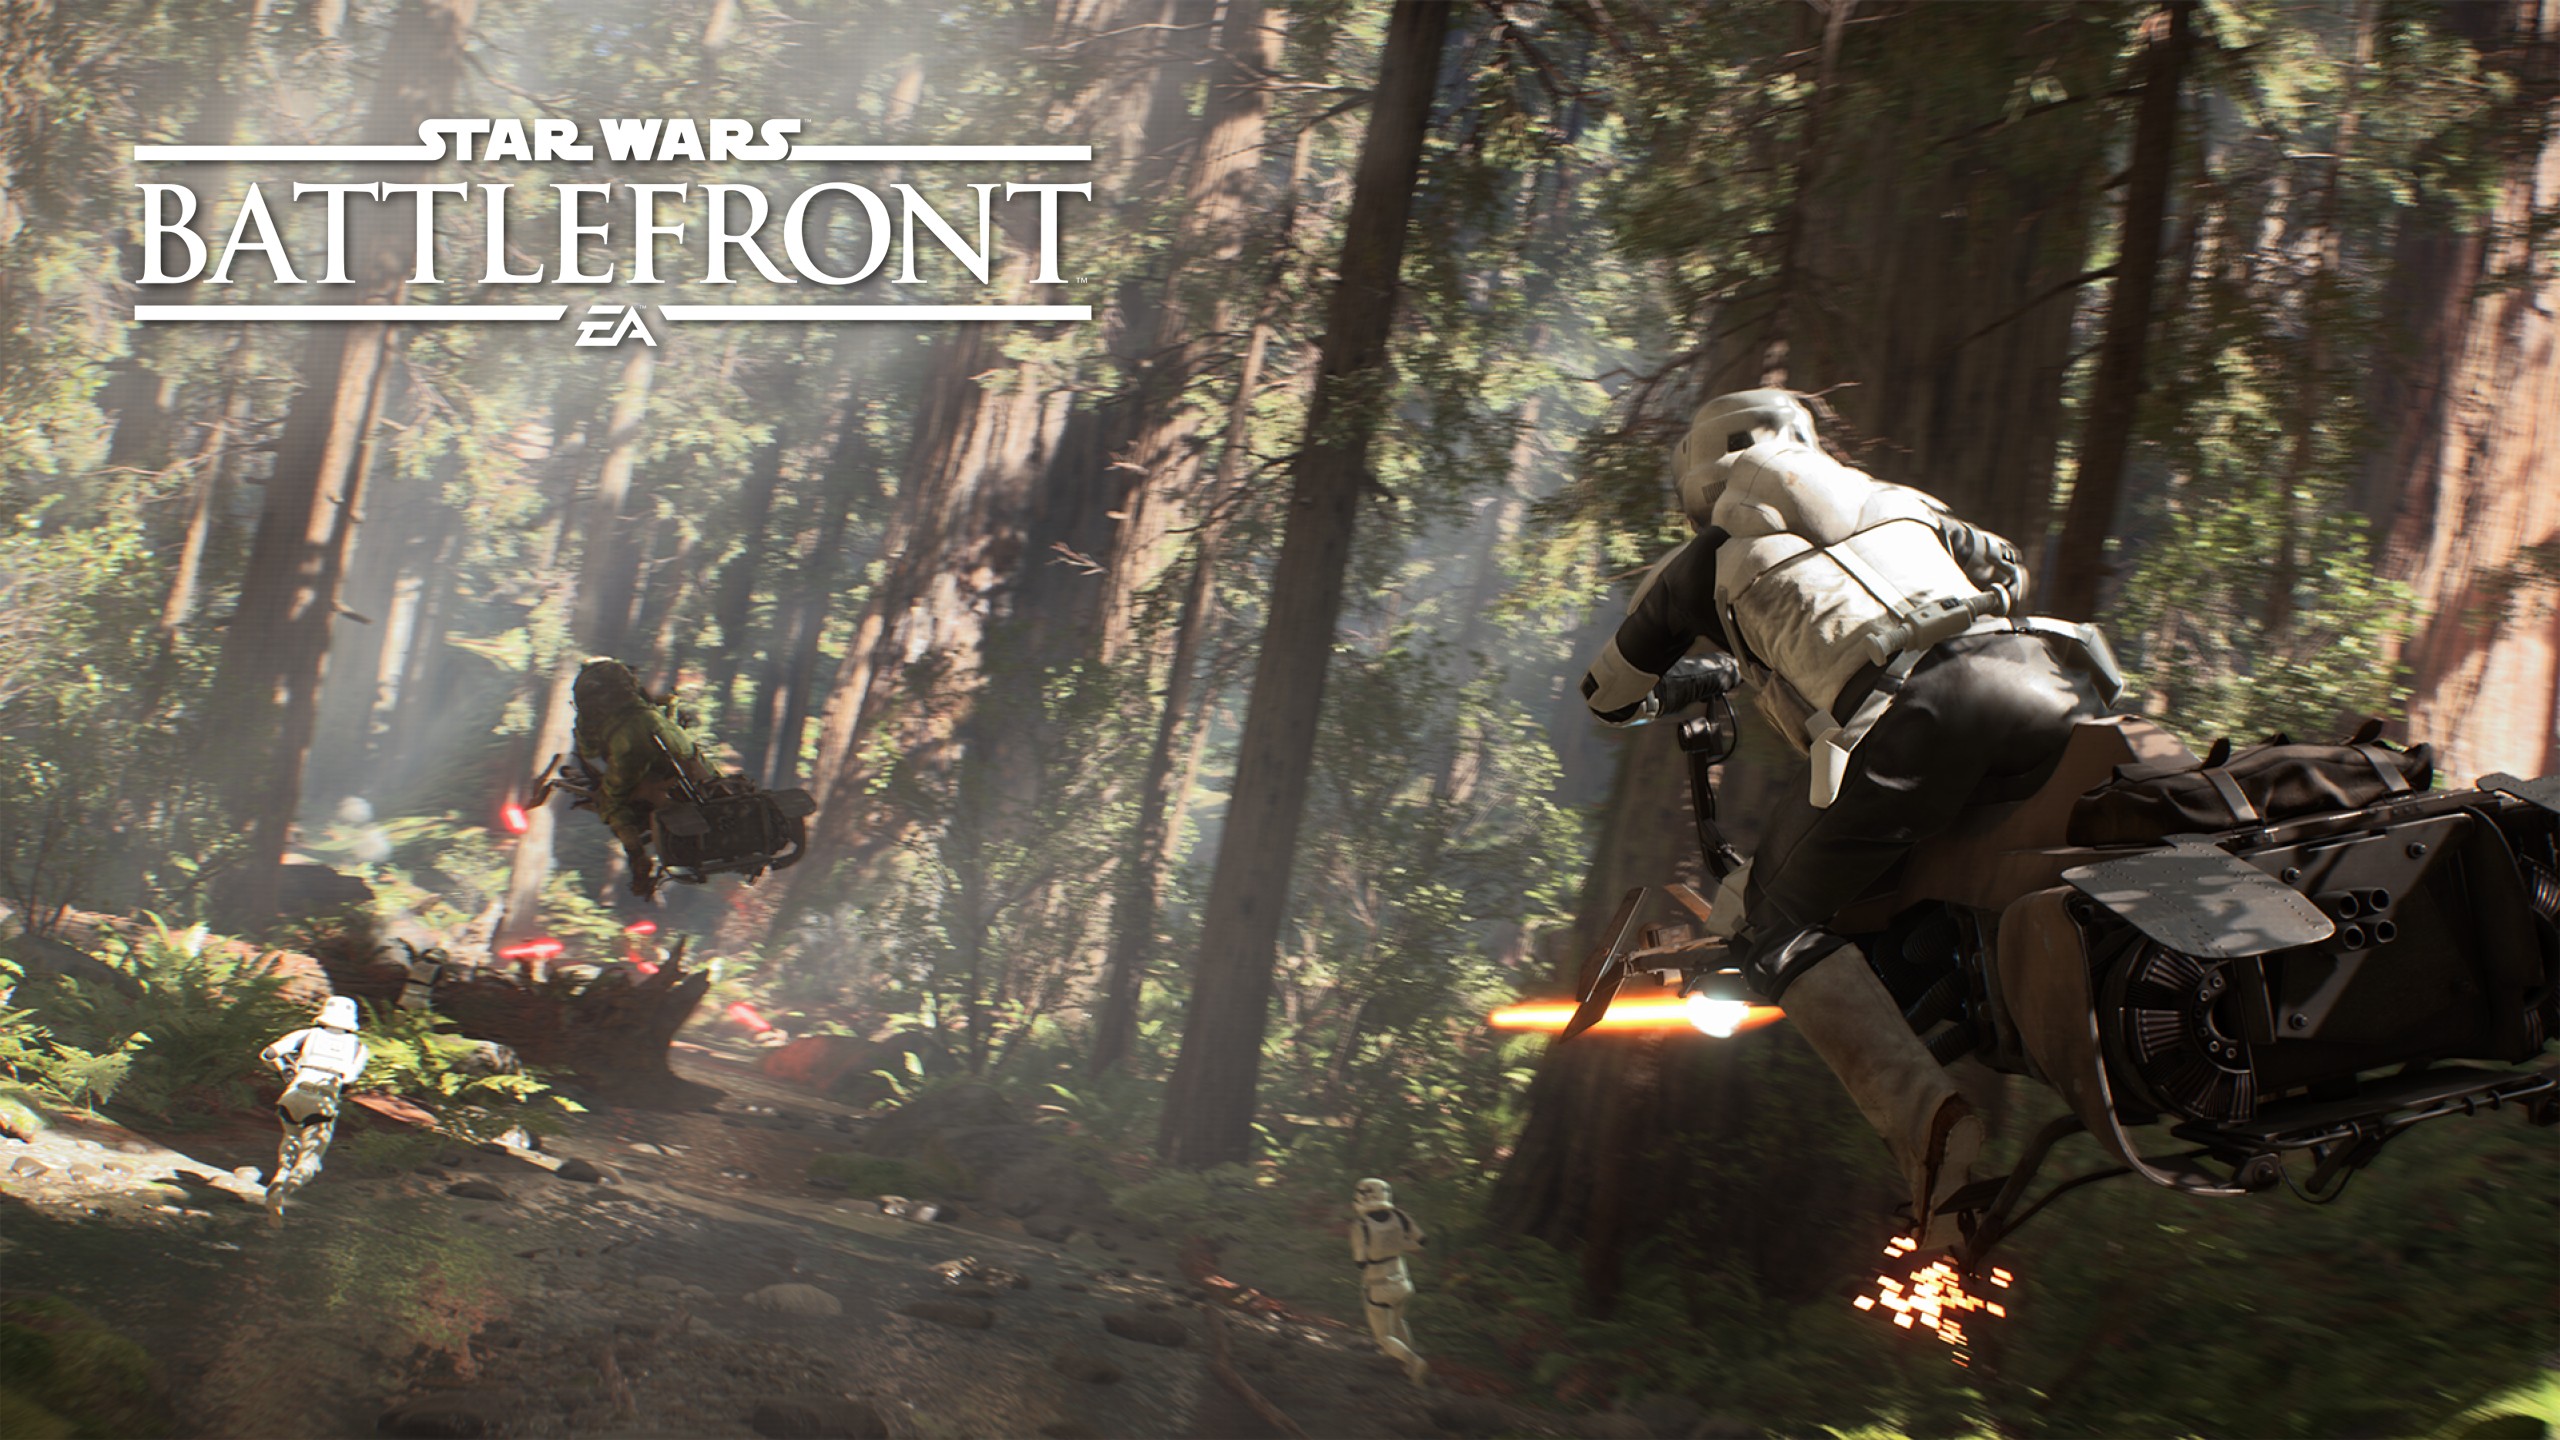 Star Wars Battlefront EA EA Games PC Gaming Electronic Arts 2560x1440